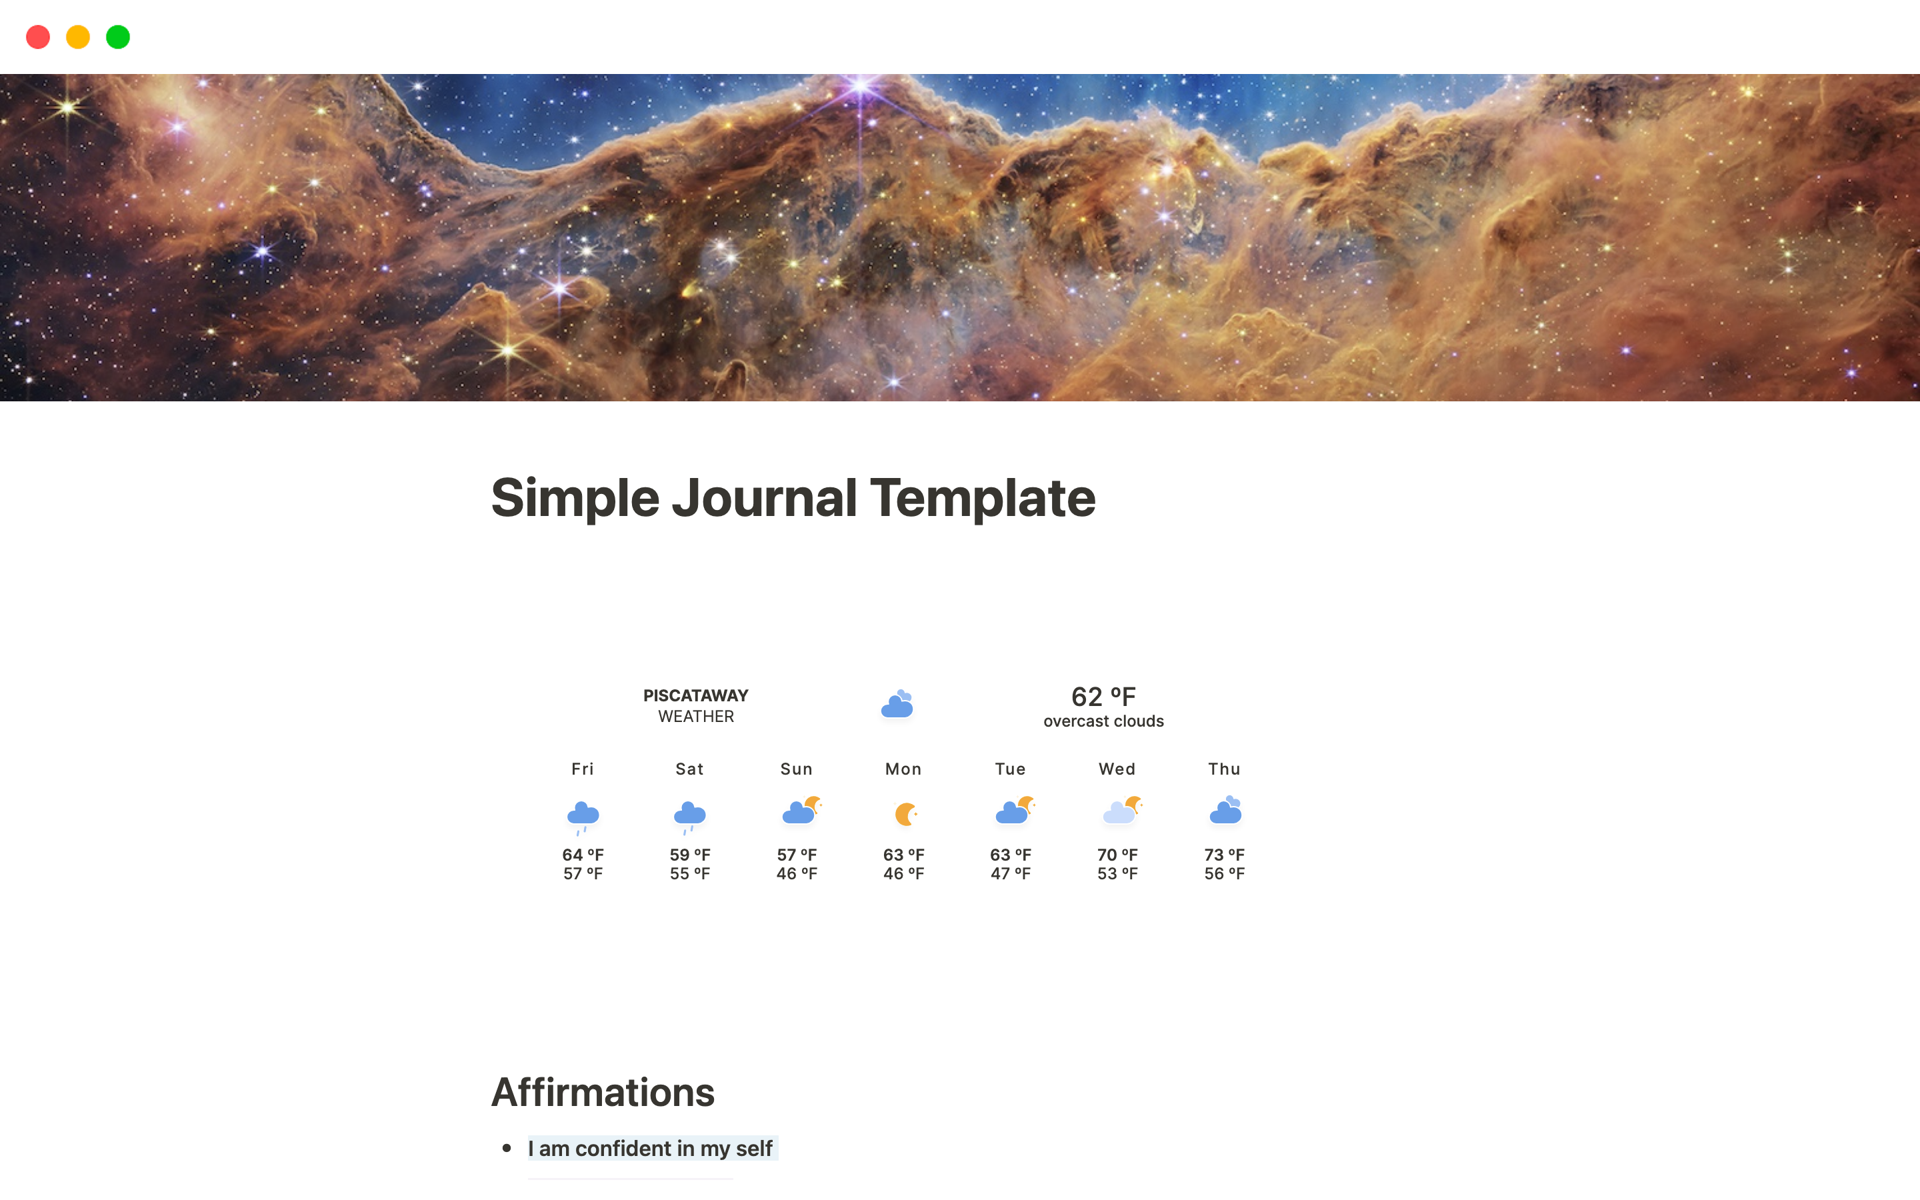 simple journal template without distractions for ease of use for beginners and experienced users.